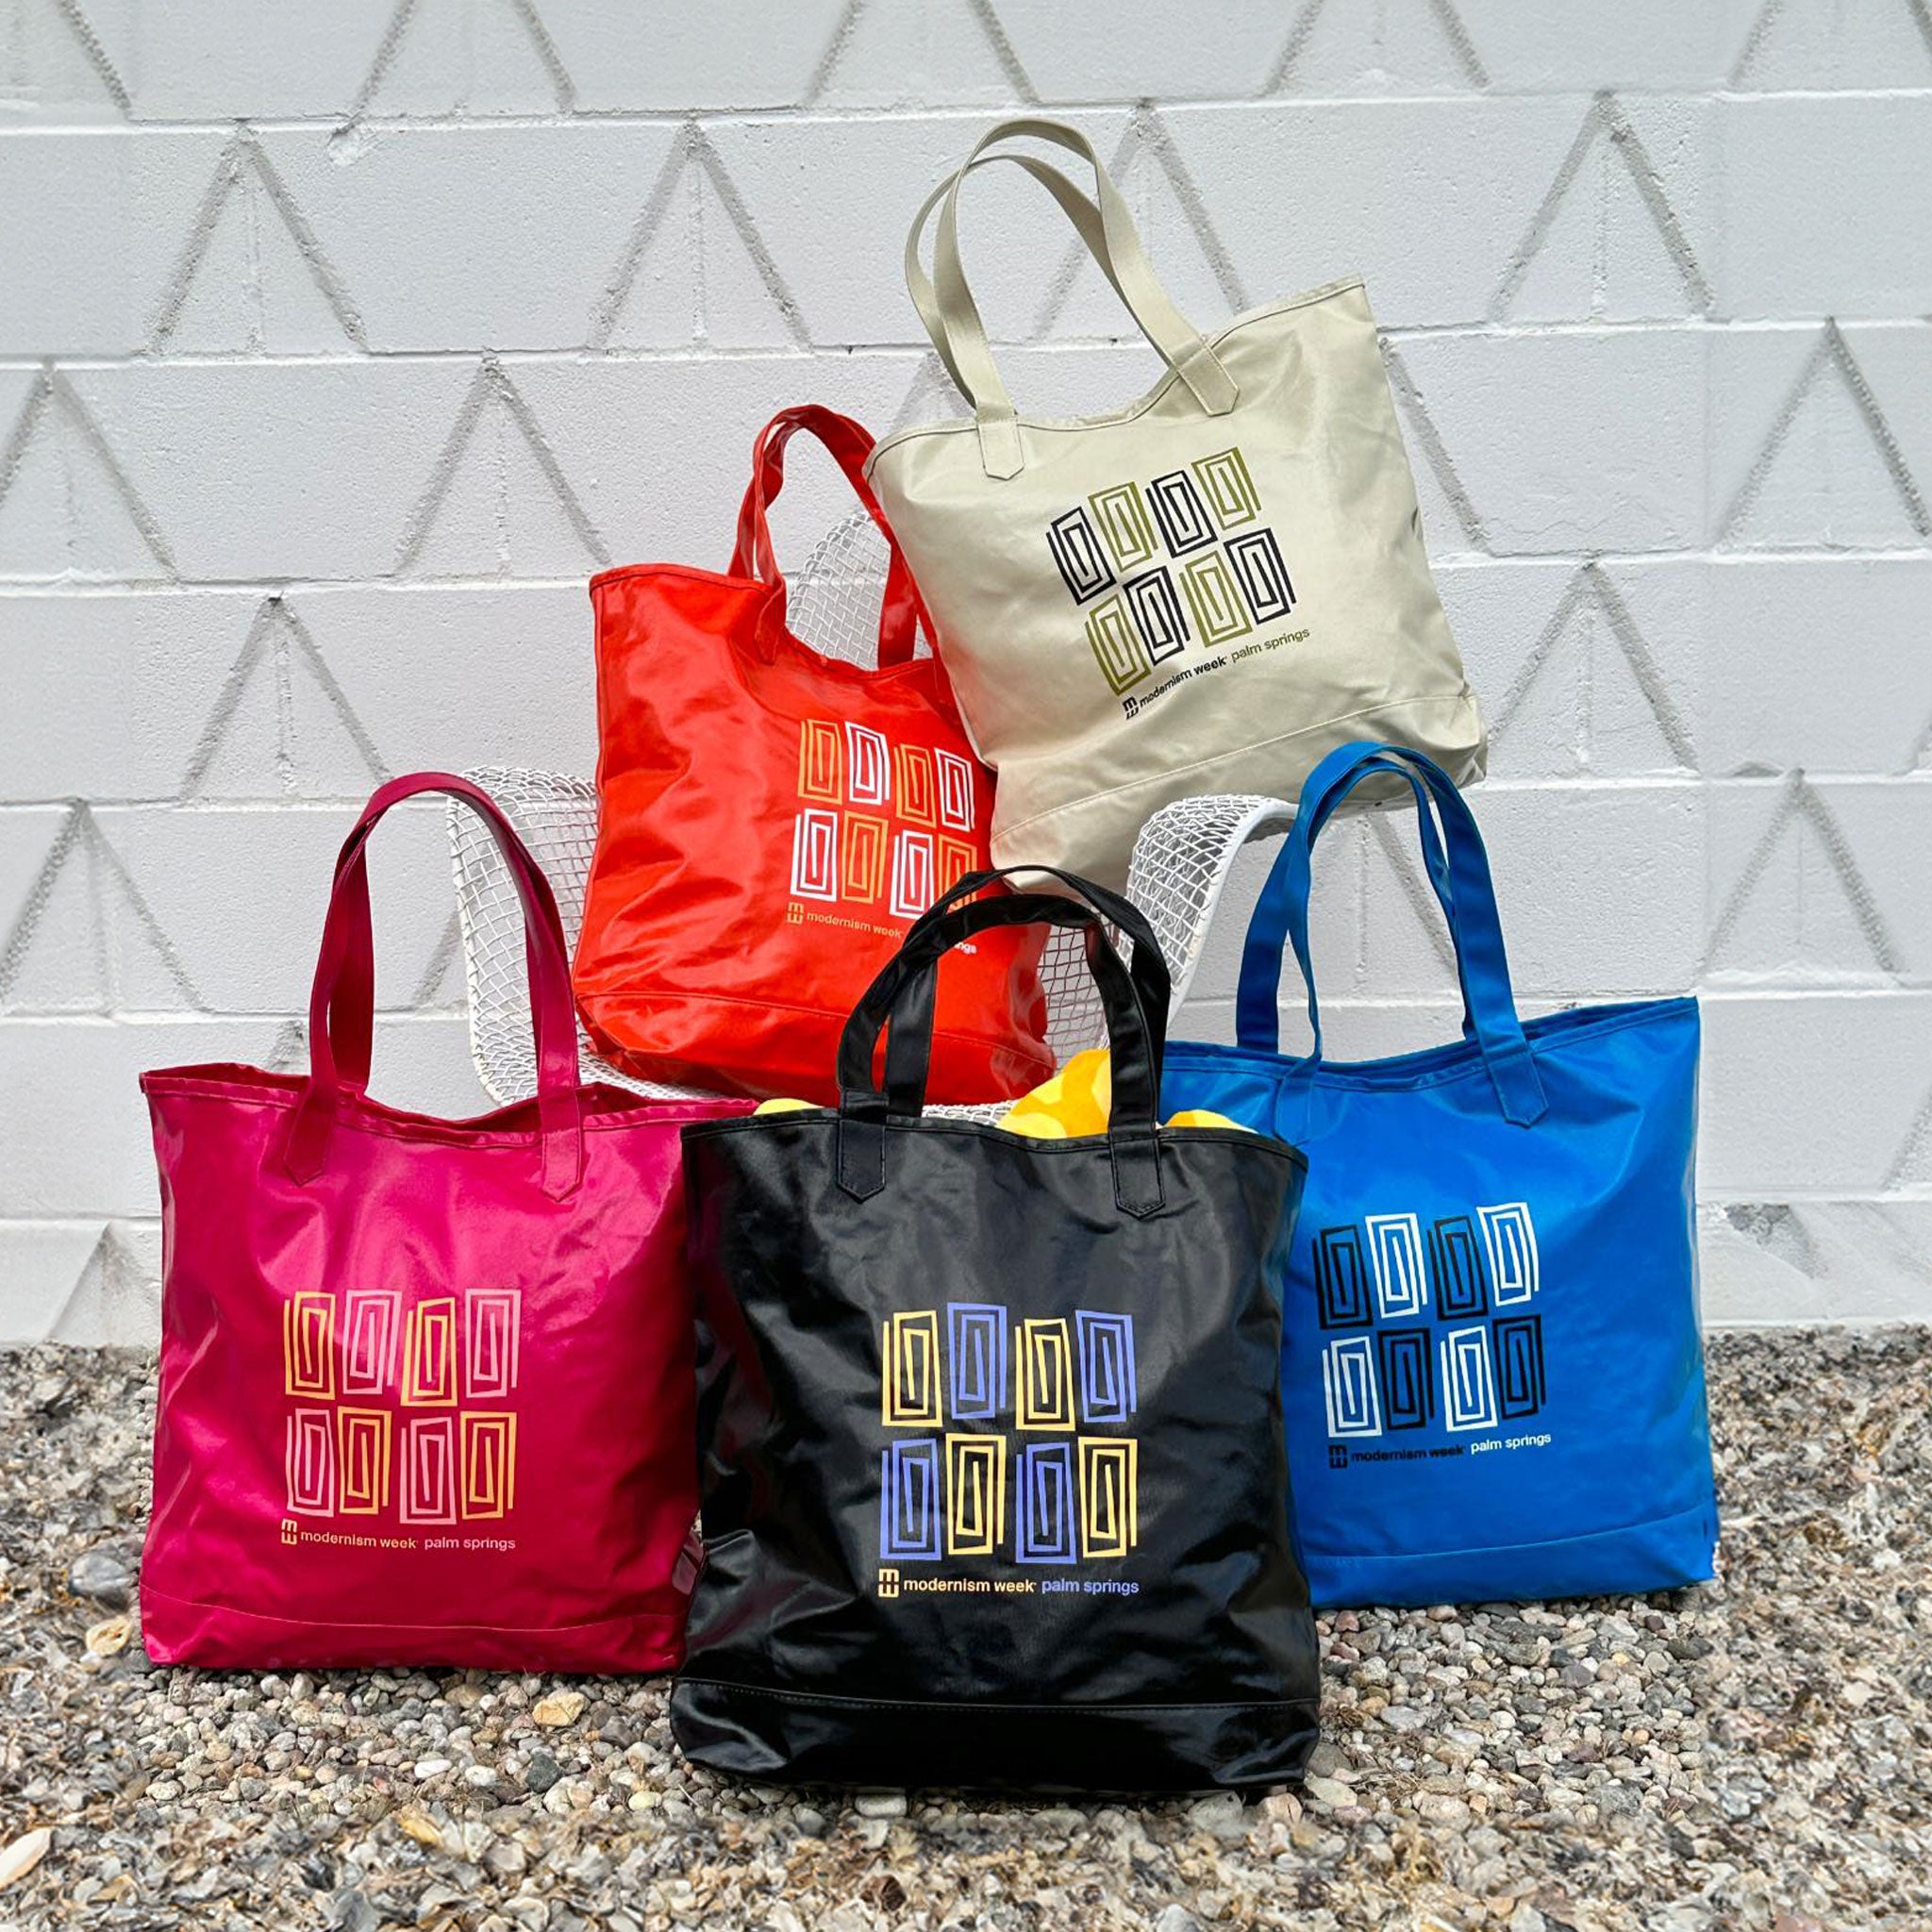 Five colorful reusable shopping tote bags stacked against a midcentury modern brick wall.